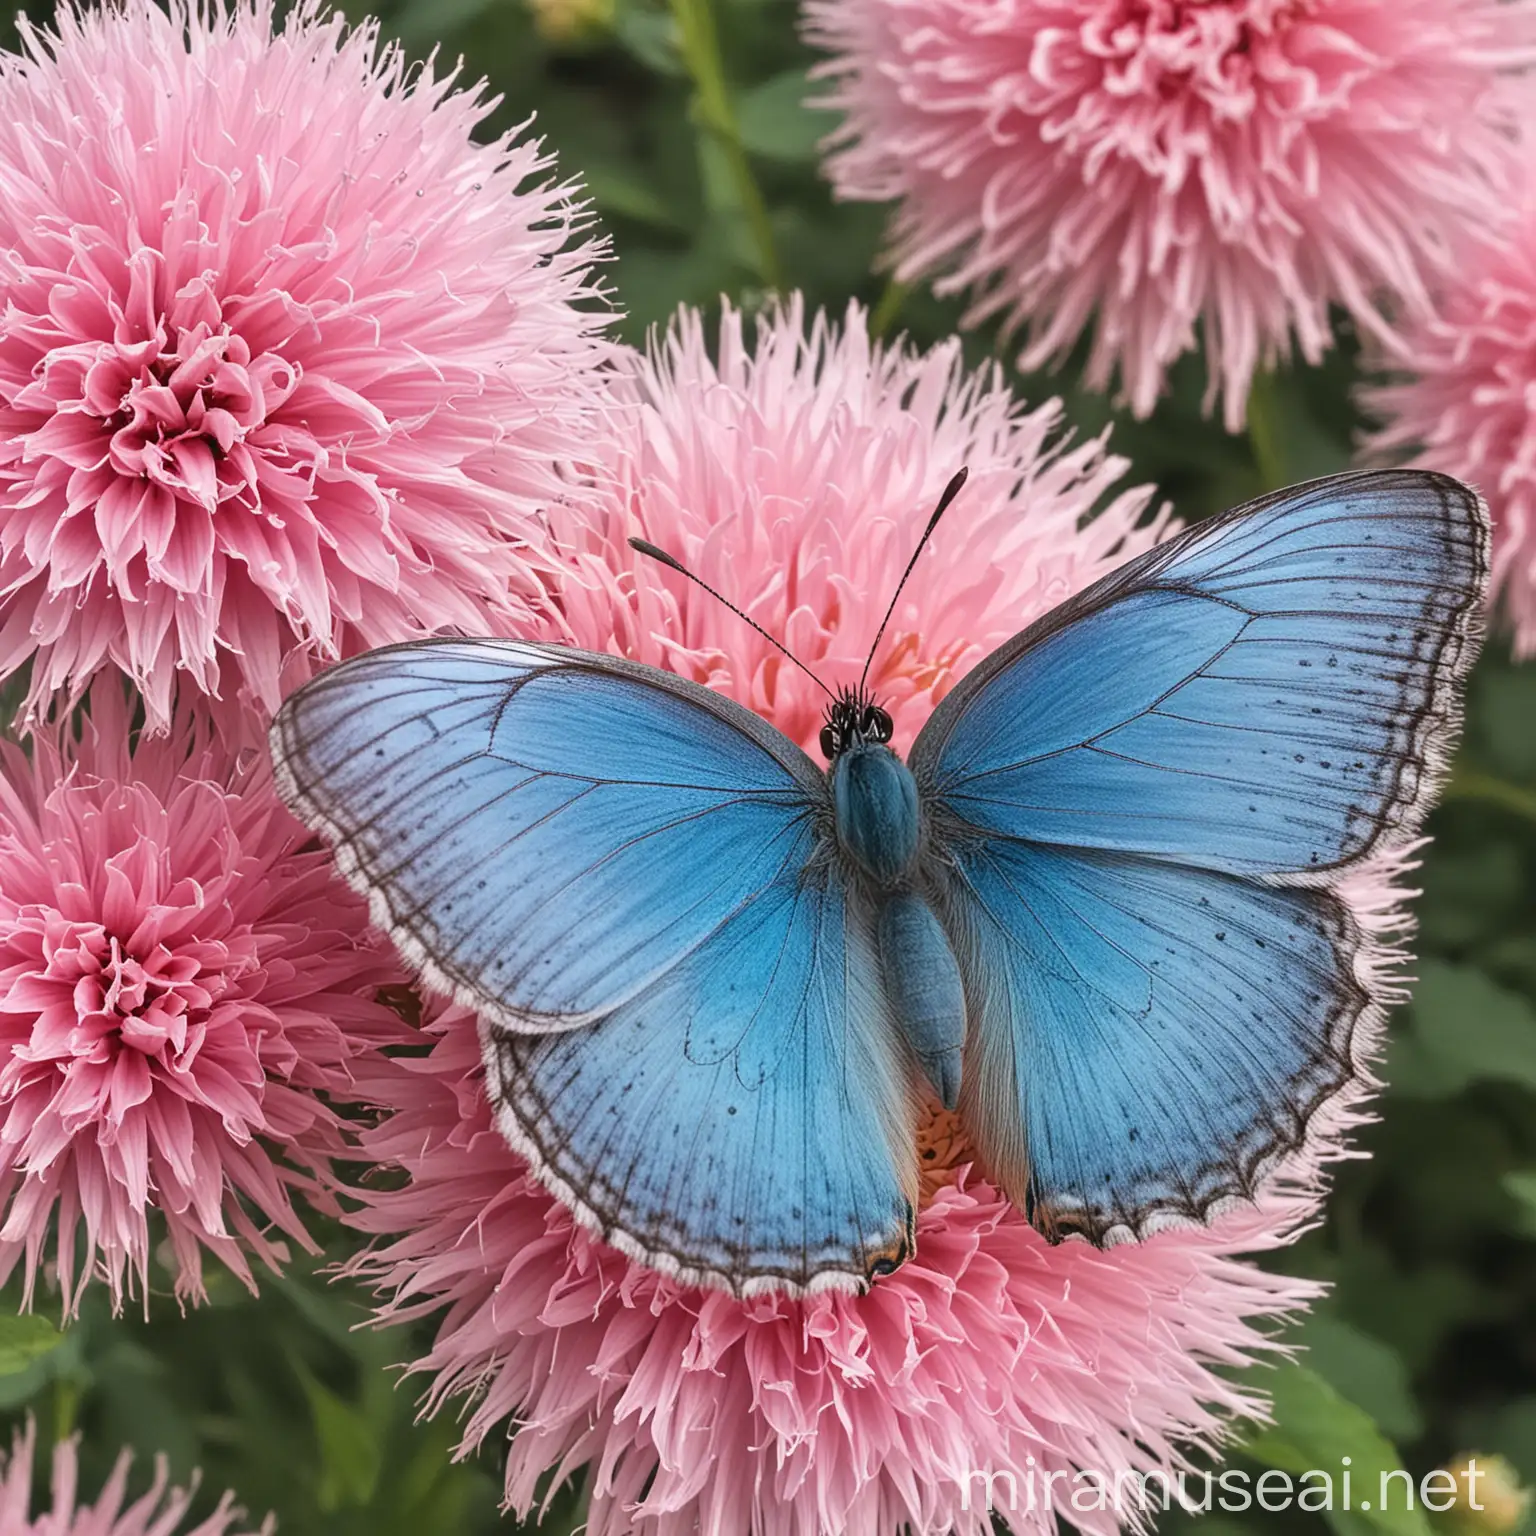 A blue butterfly on a pink full fluffy flower
